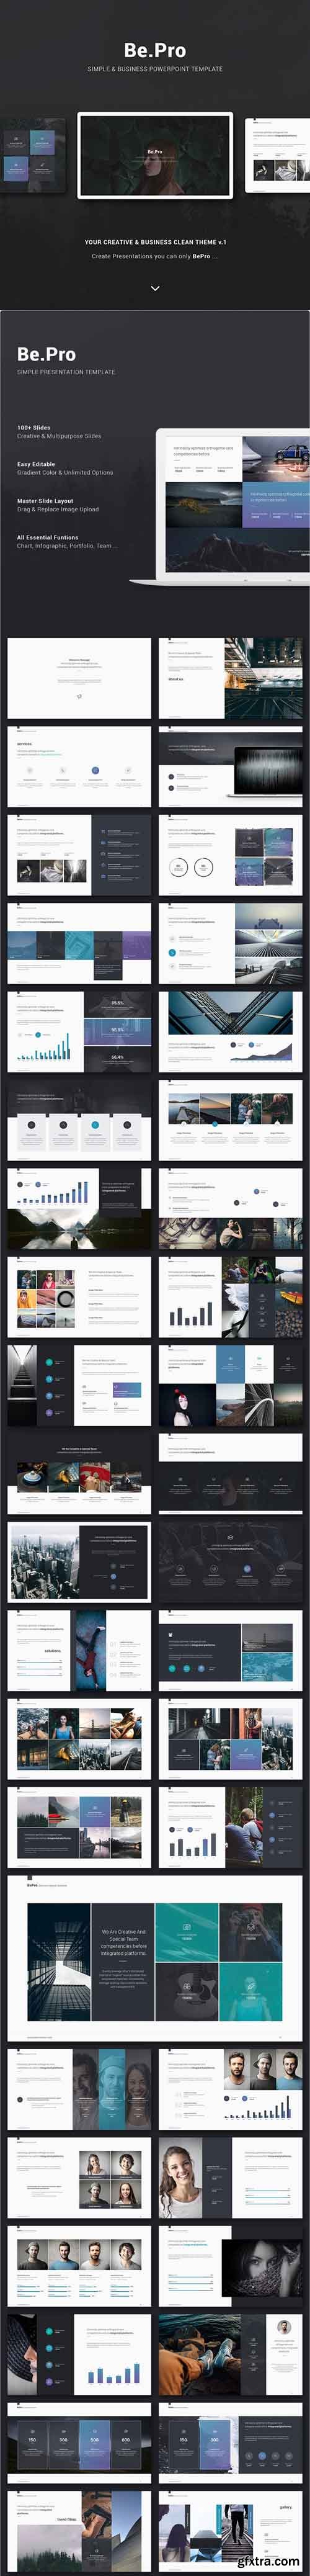 GR - BePro Simply & Business Powerpoint Template 18369694